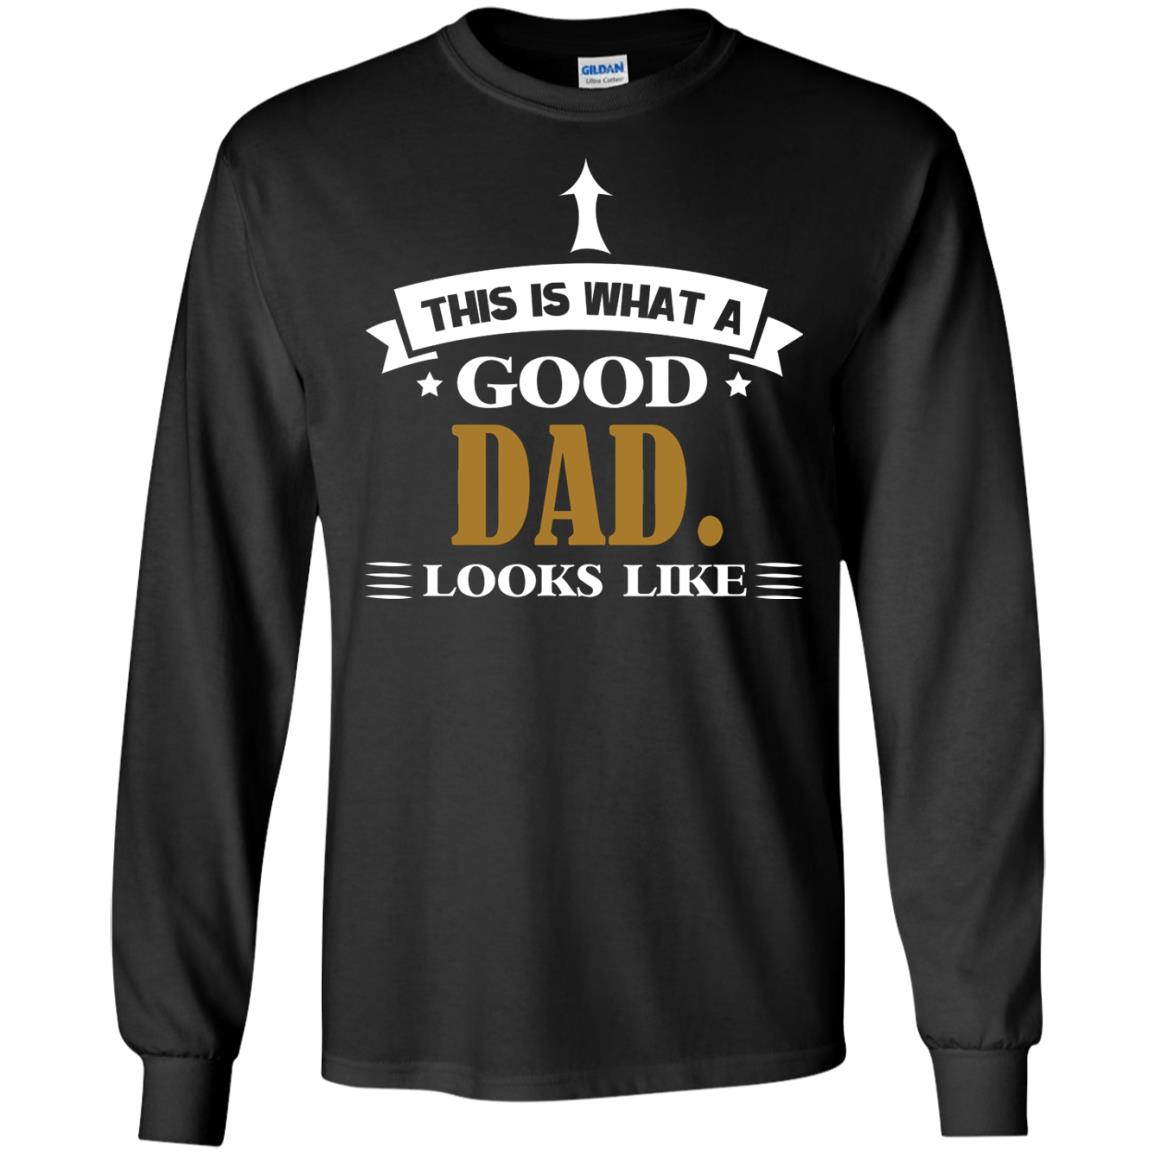 This Is What A Good Dad Look Like Shirt For Father's DayG240 Gildan LS Ultra Cotton T-Shirt